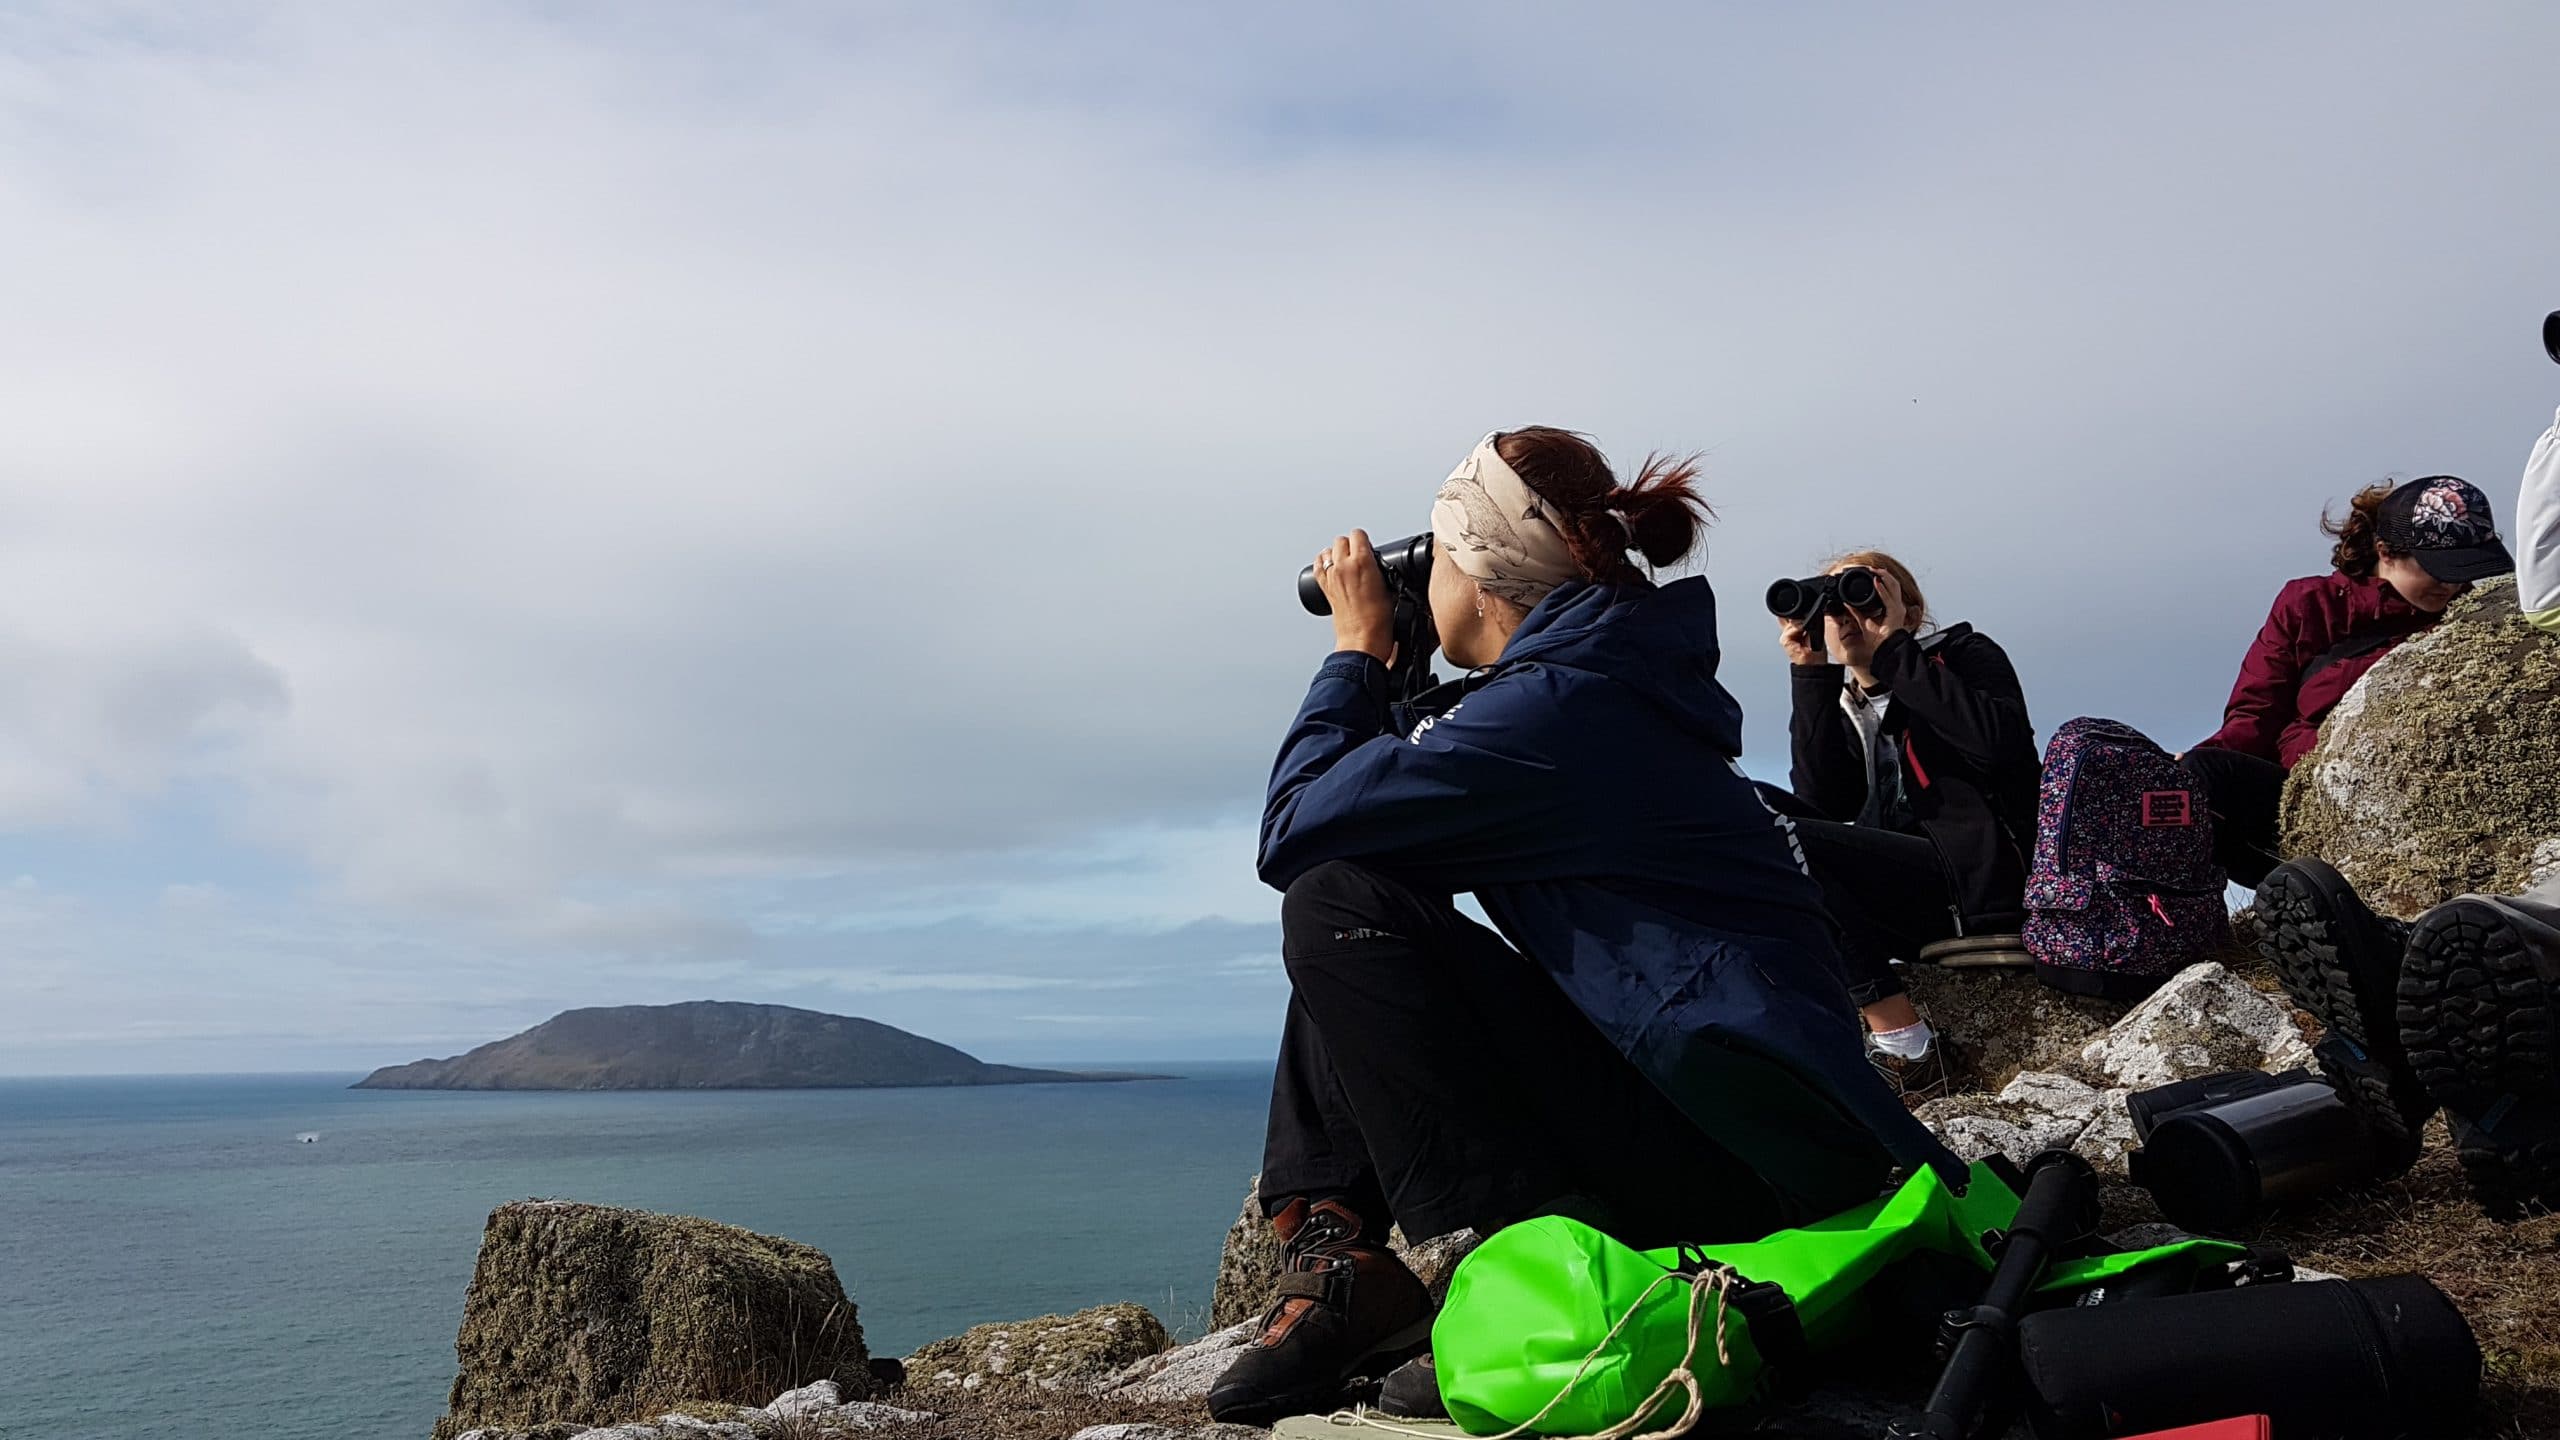 The mystical island of Bardsey enchanted us from our viewpoint